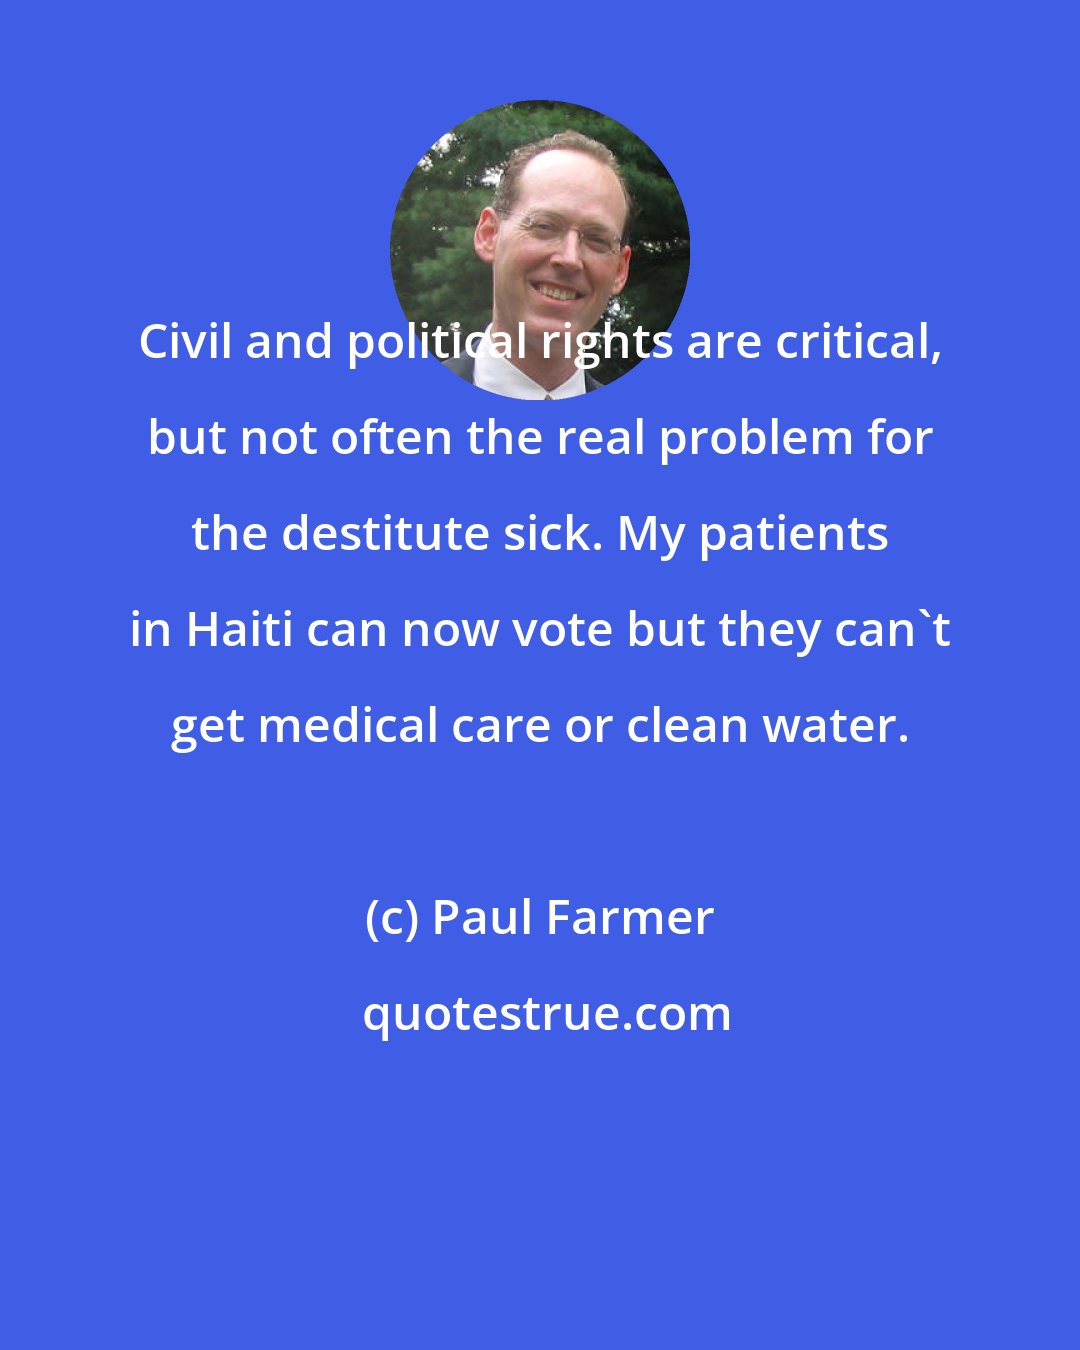 Paul Farmer: Civil and political rights are critical, but not often the real problem for the destitute sick. My patients in Haiti can now vote but they can't get medical care or clean water.